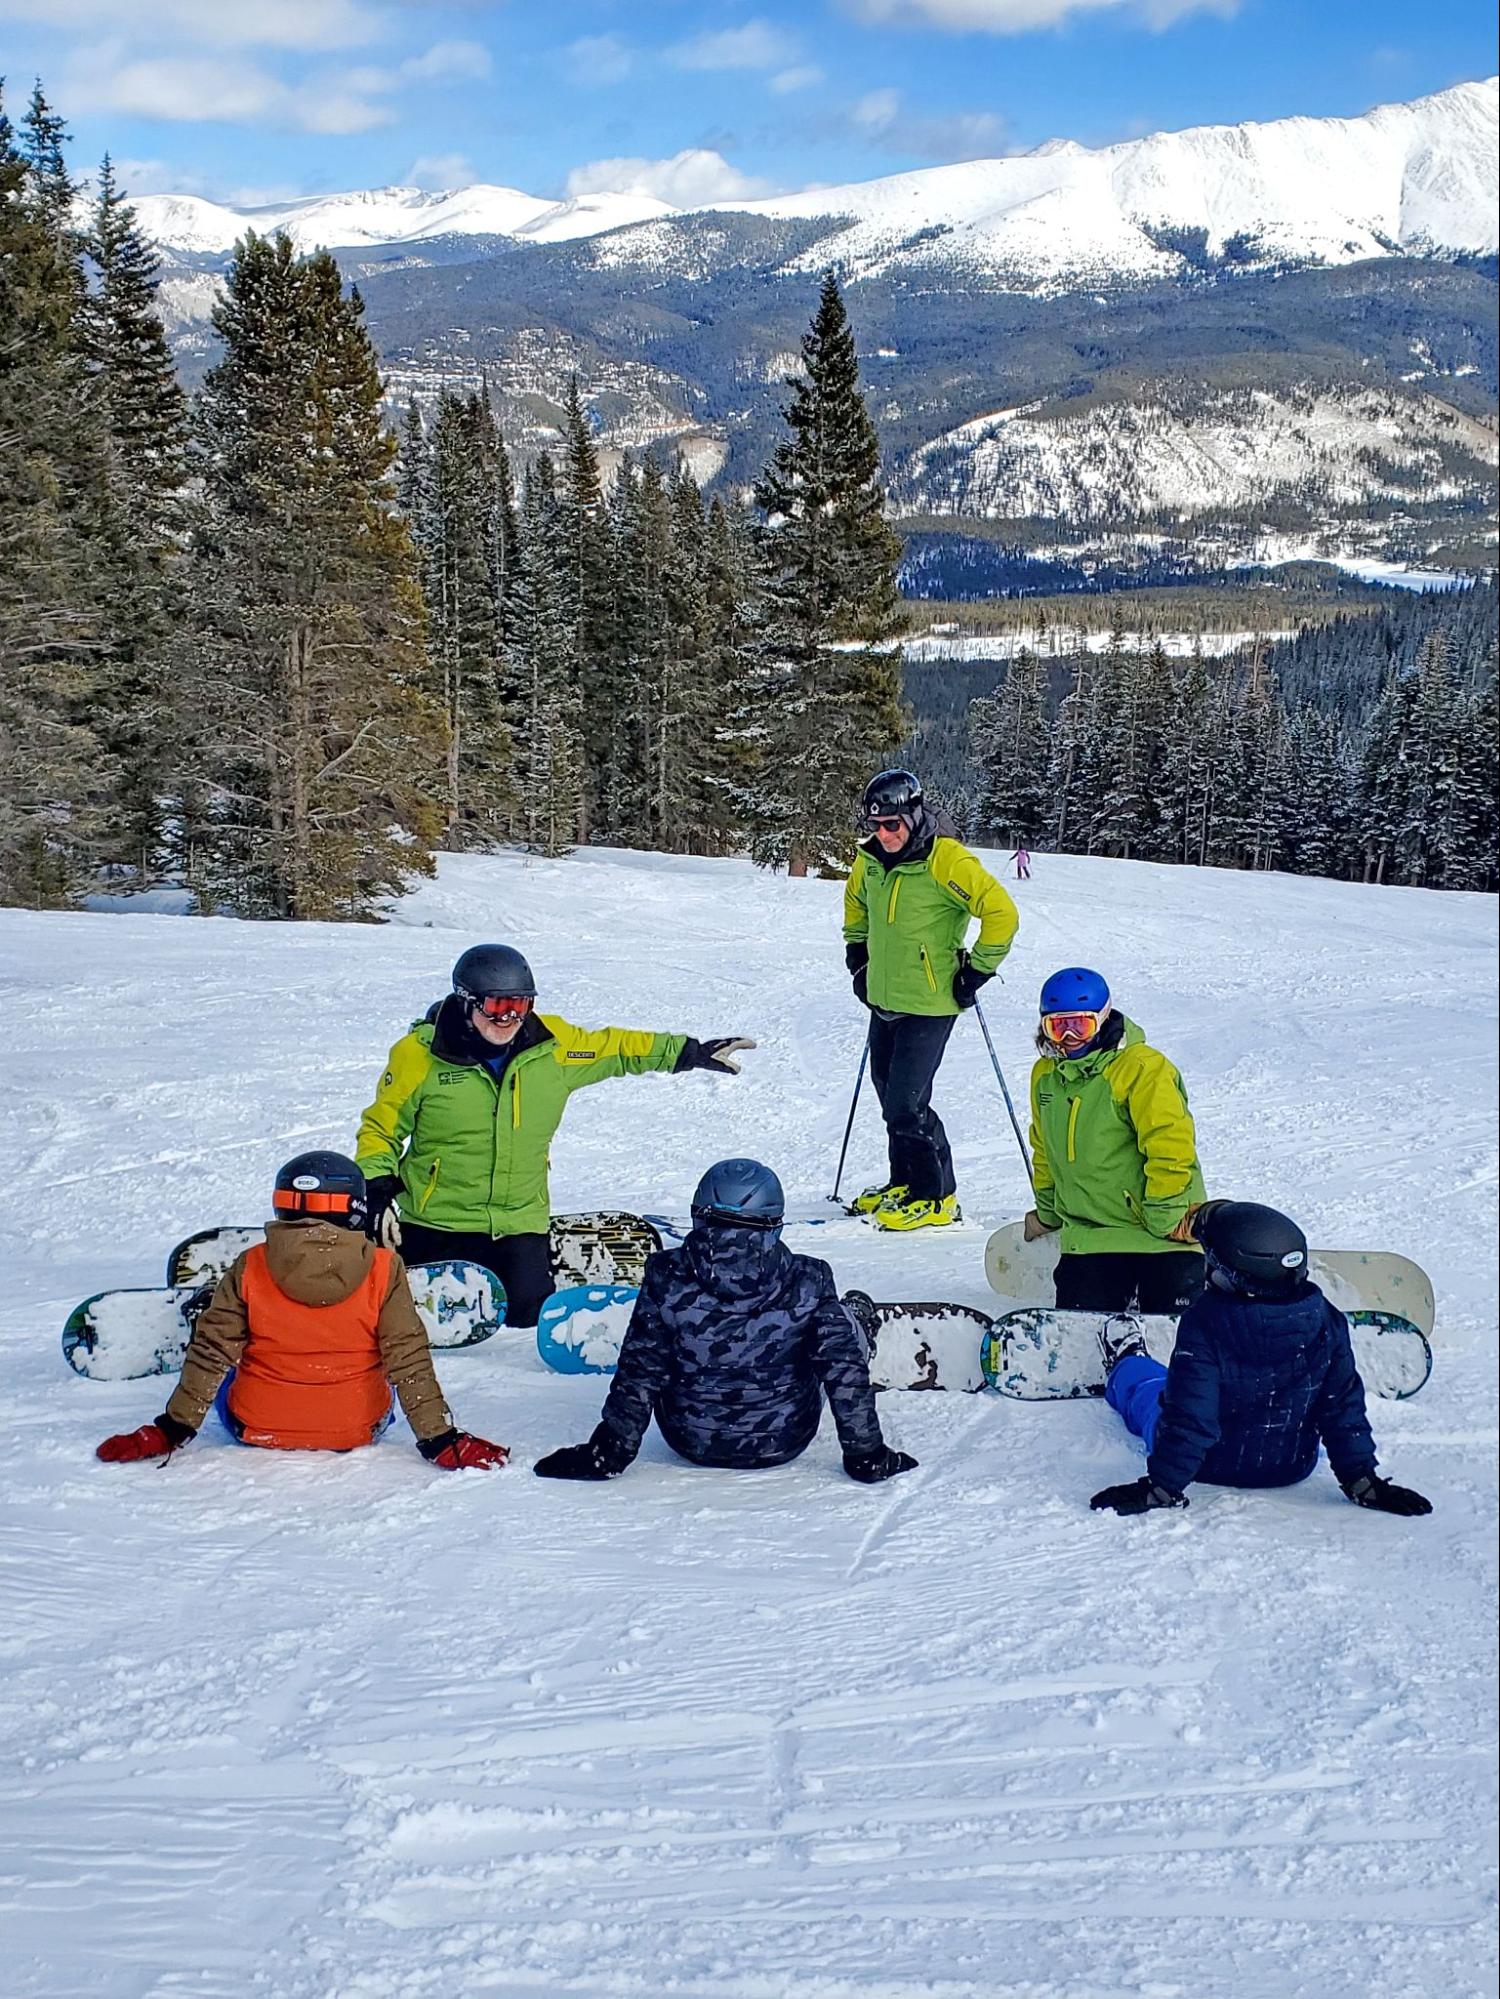 Thanks to the generous donors of the SSA program, many participants of this program have learned to ski and snowboard.